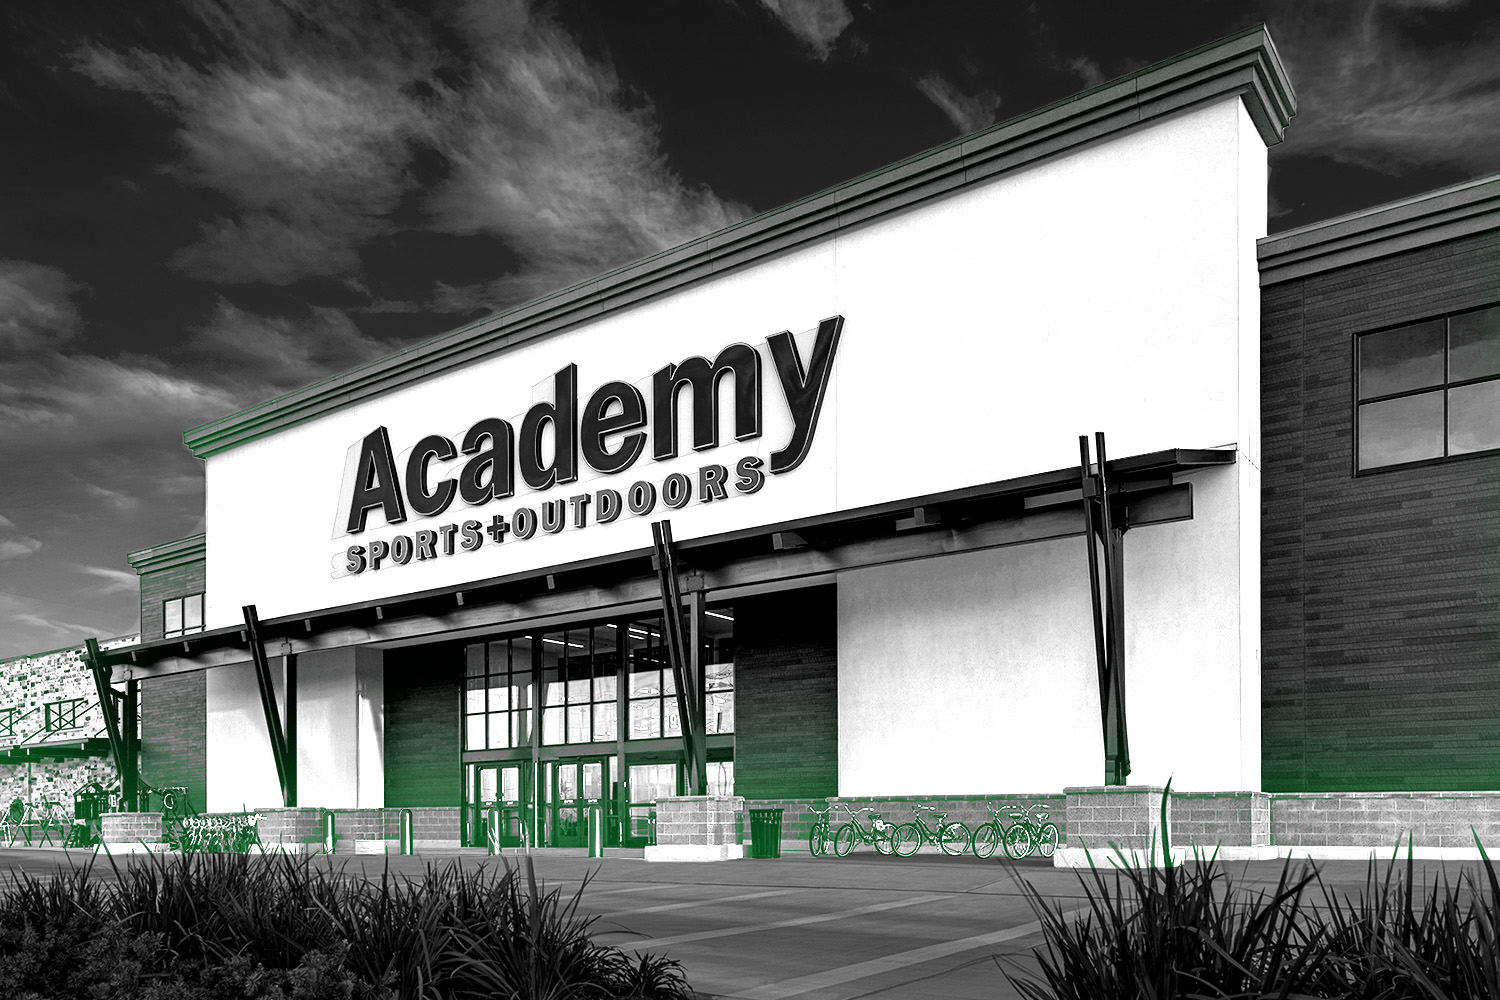 Academy-Sports-Outdoors